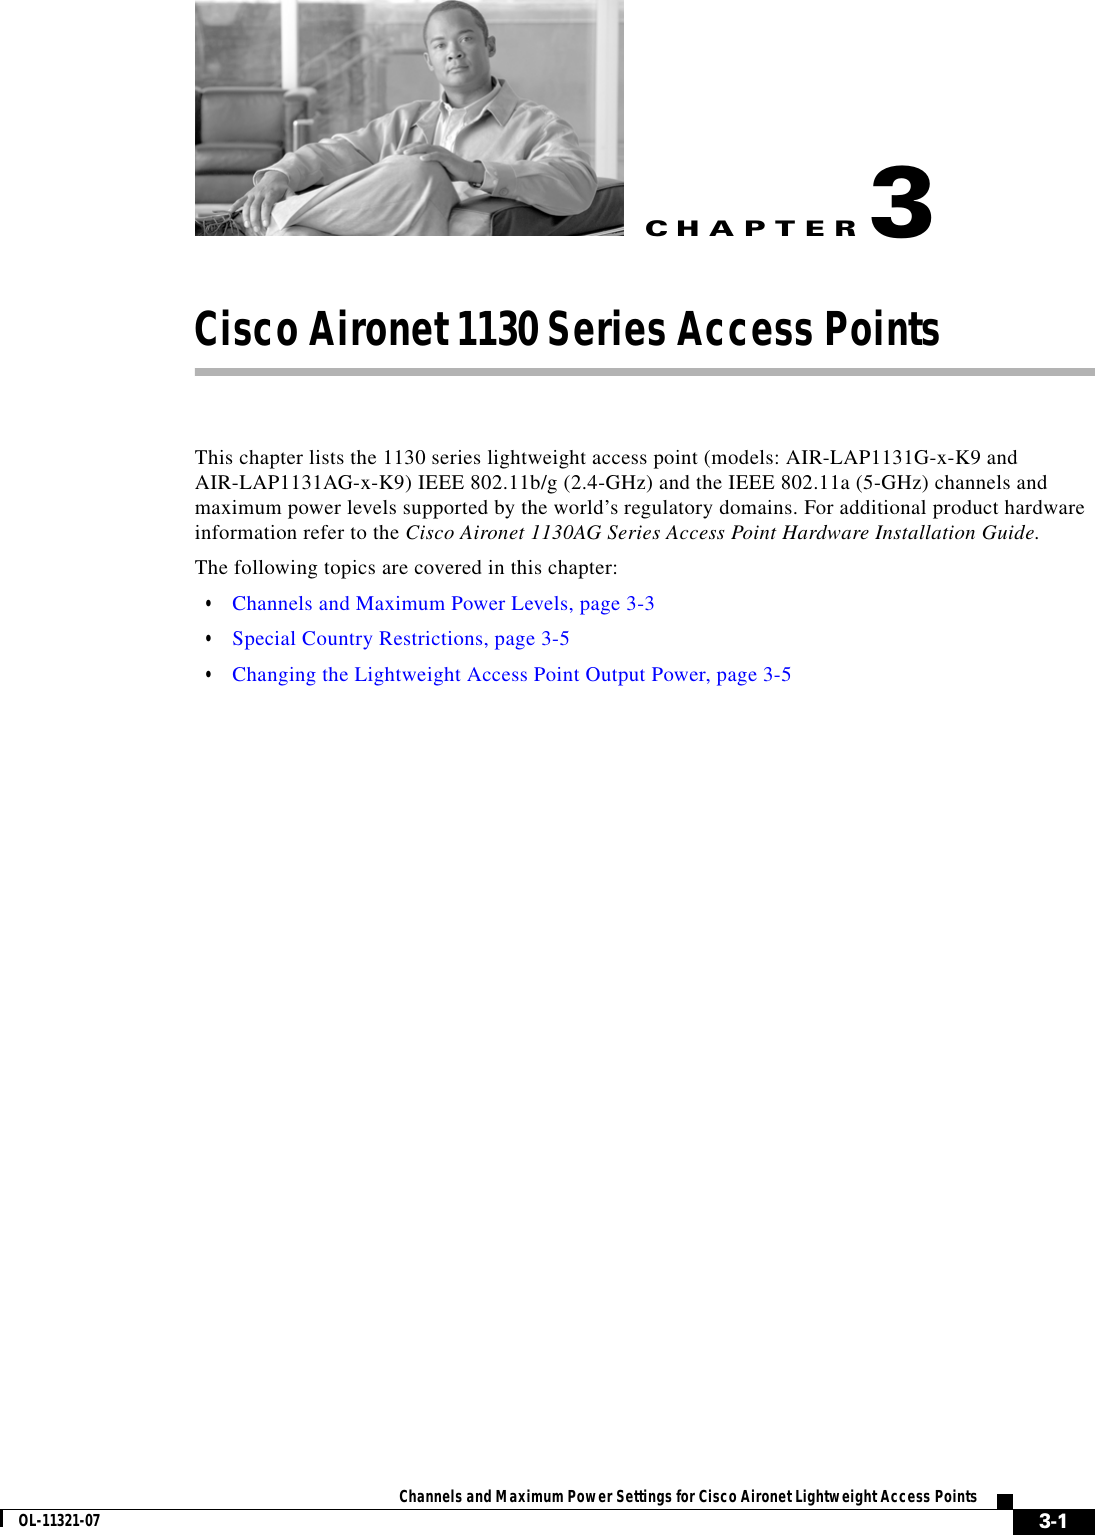 CHAPTER 3-1Channels and Maximum Power Settings for Cisco Aironet Lightweight Access PointsOL-11321-073Cisco Aironet 1130 Series Access PointsThis chapter lists the 1130 series lightweight access point (models: AIR-LAP1131G-x-K9 and AIR-LAP1131AG-x-K9) IEEE 802.11b/g (2.4-GHz) and the IEEE 802.11a (5-GHz) channels and maximum power levels supported by the world’s regulatory domains. For additional product hardware information refer to the Cisco Aironet 1130AG Series Access Point Hardware Installation Guide.The following topics are covered in this chapter:  • Channels and Maximum Power Levels, page 3-3  • Special Country Restrictions, page 3-5  • Changing the Lightweight Access Point Output Power, page 3-5